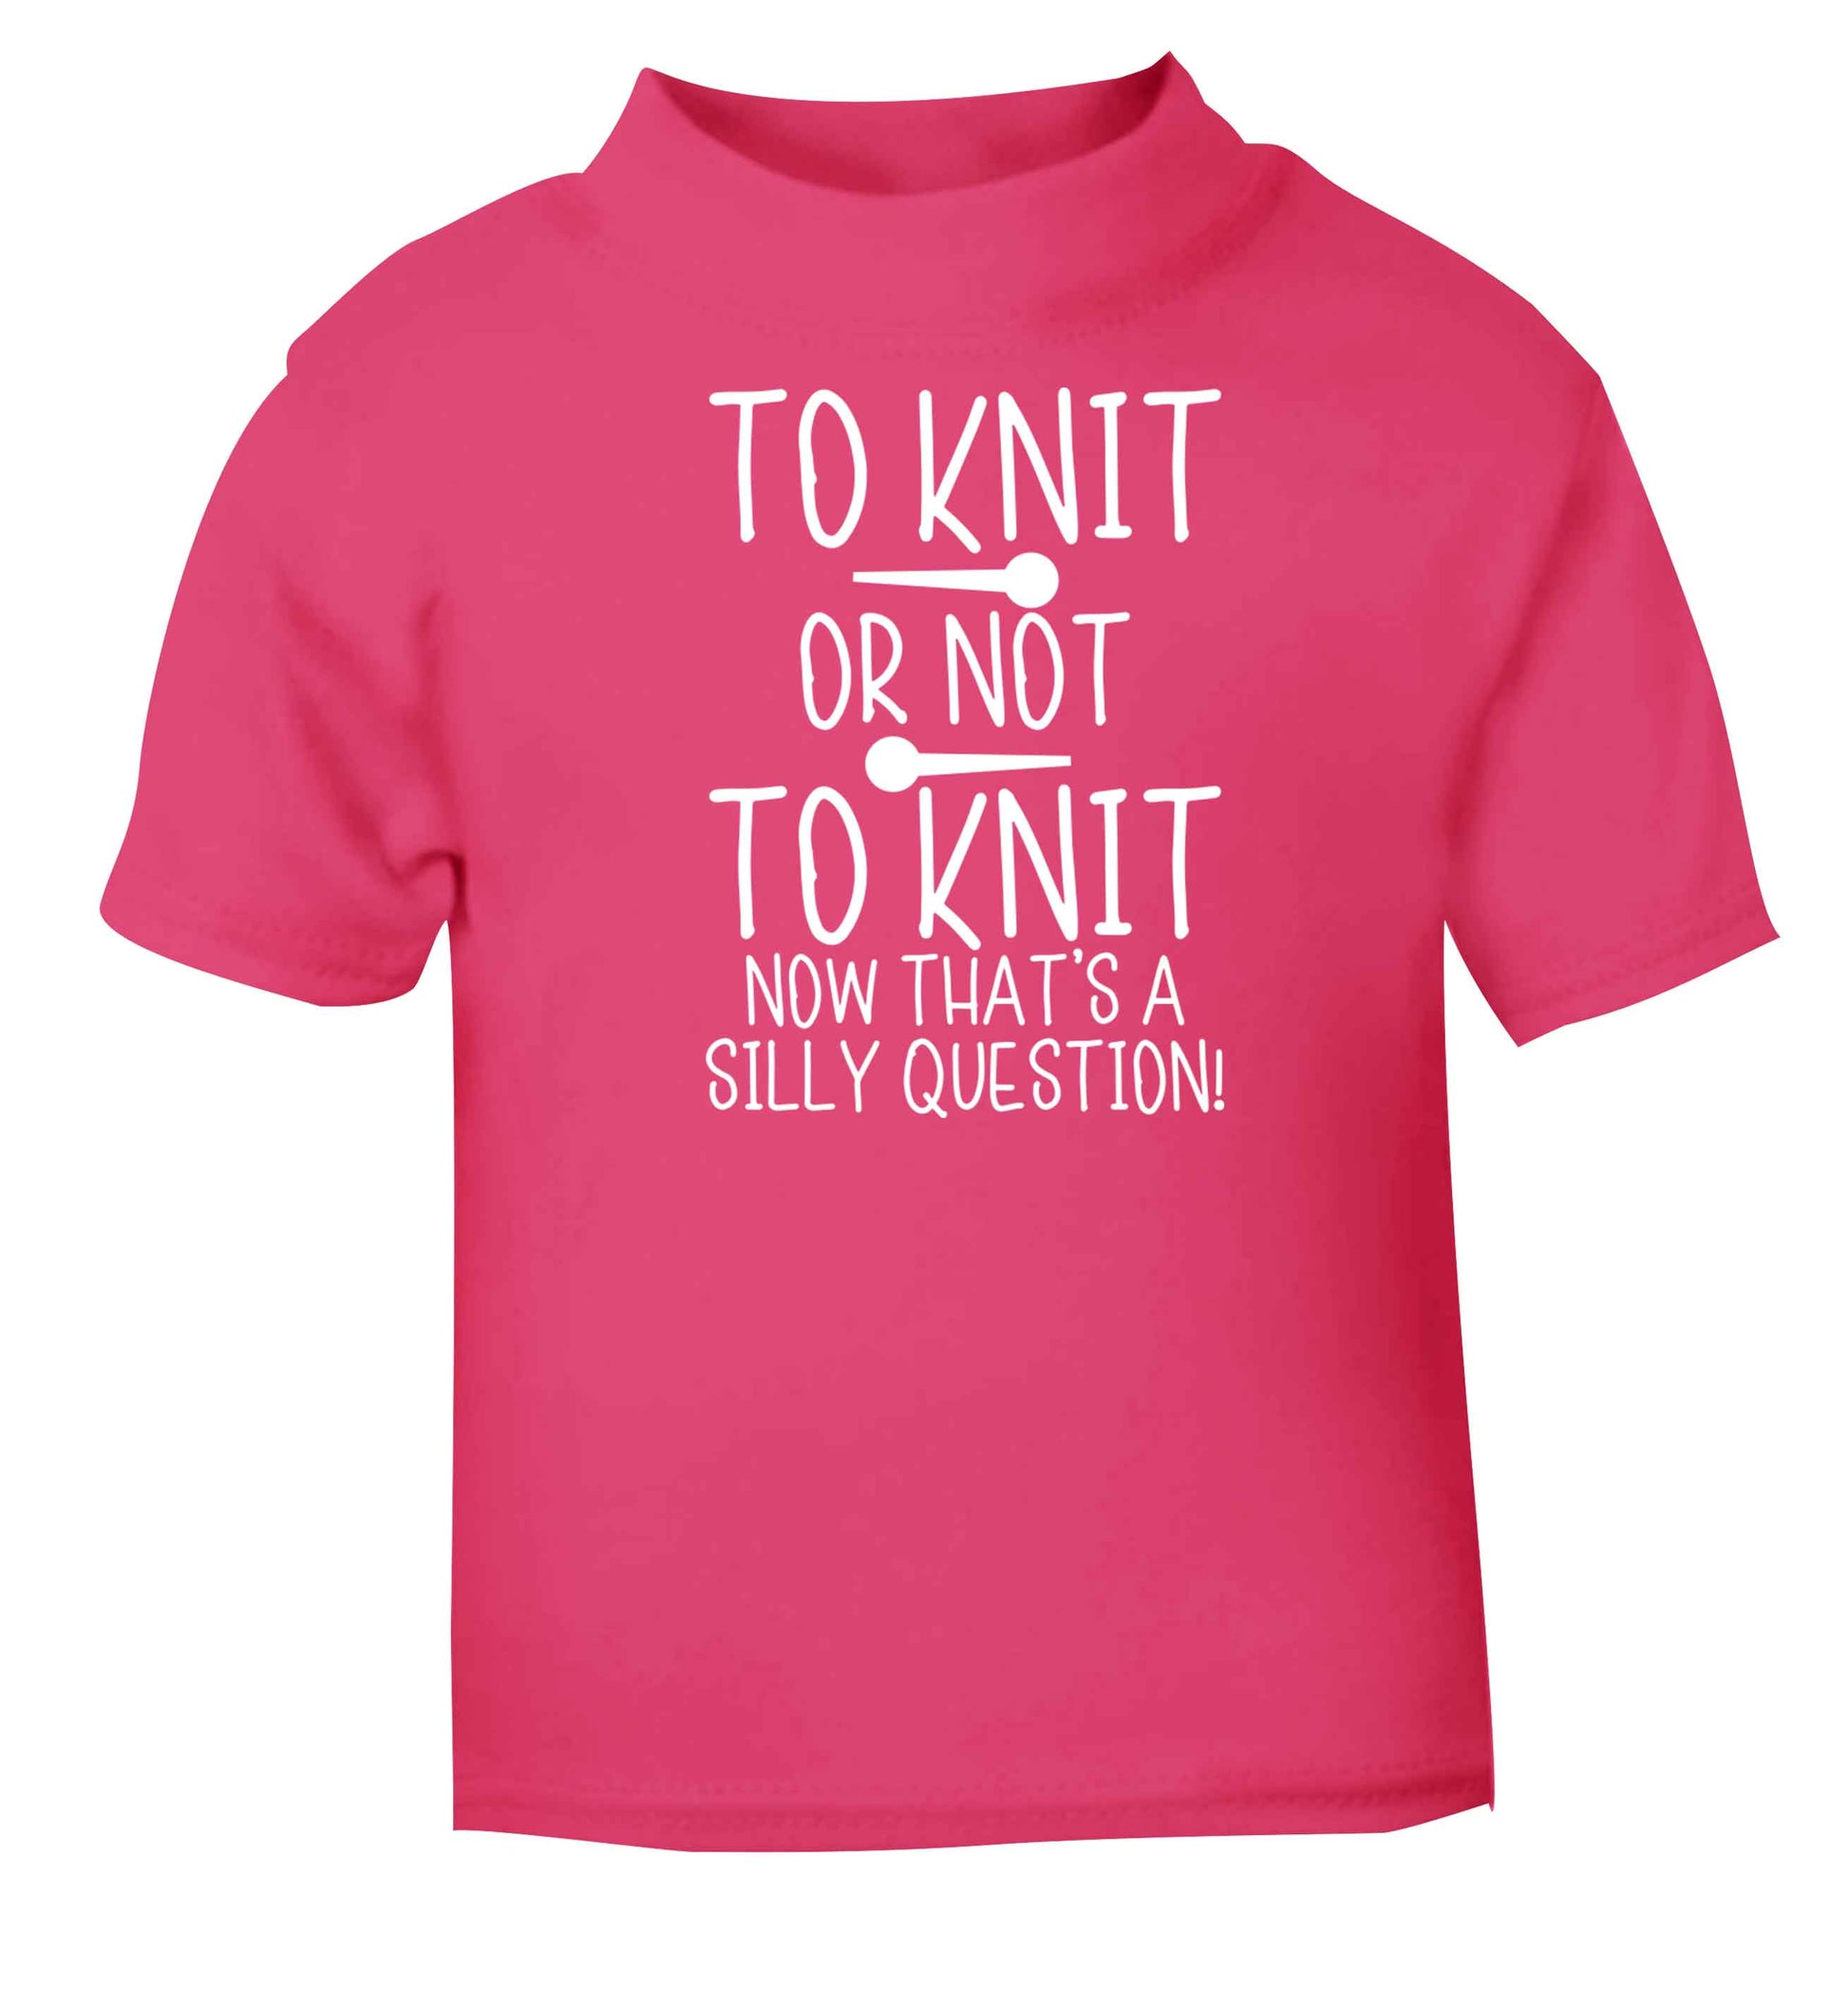 To knit or not to knit now that's a silly question pink baby toddler Tshirt 2 Years